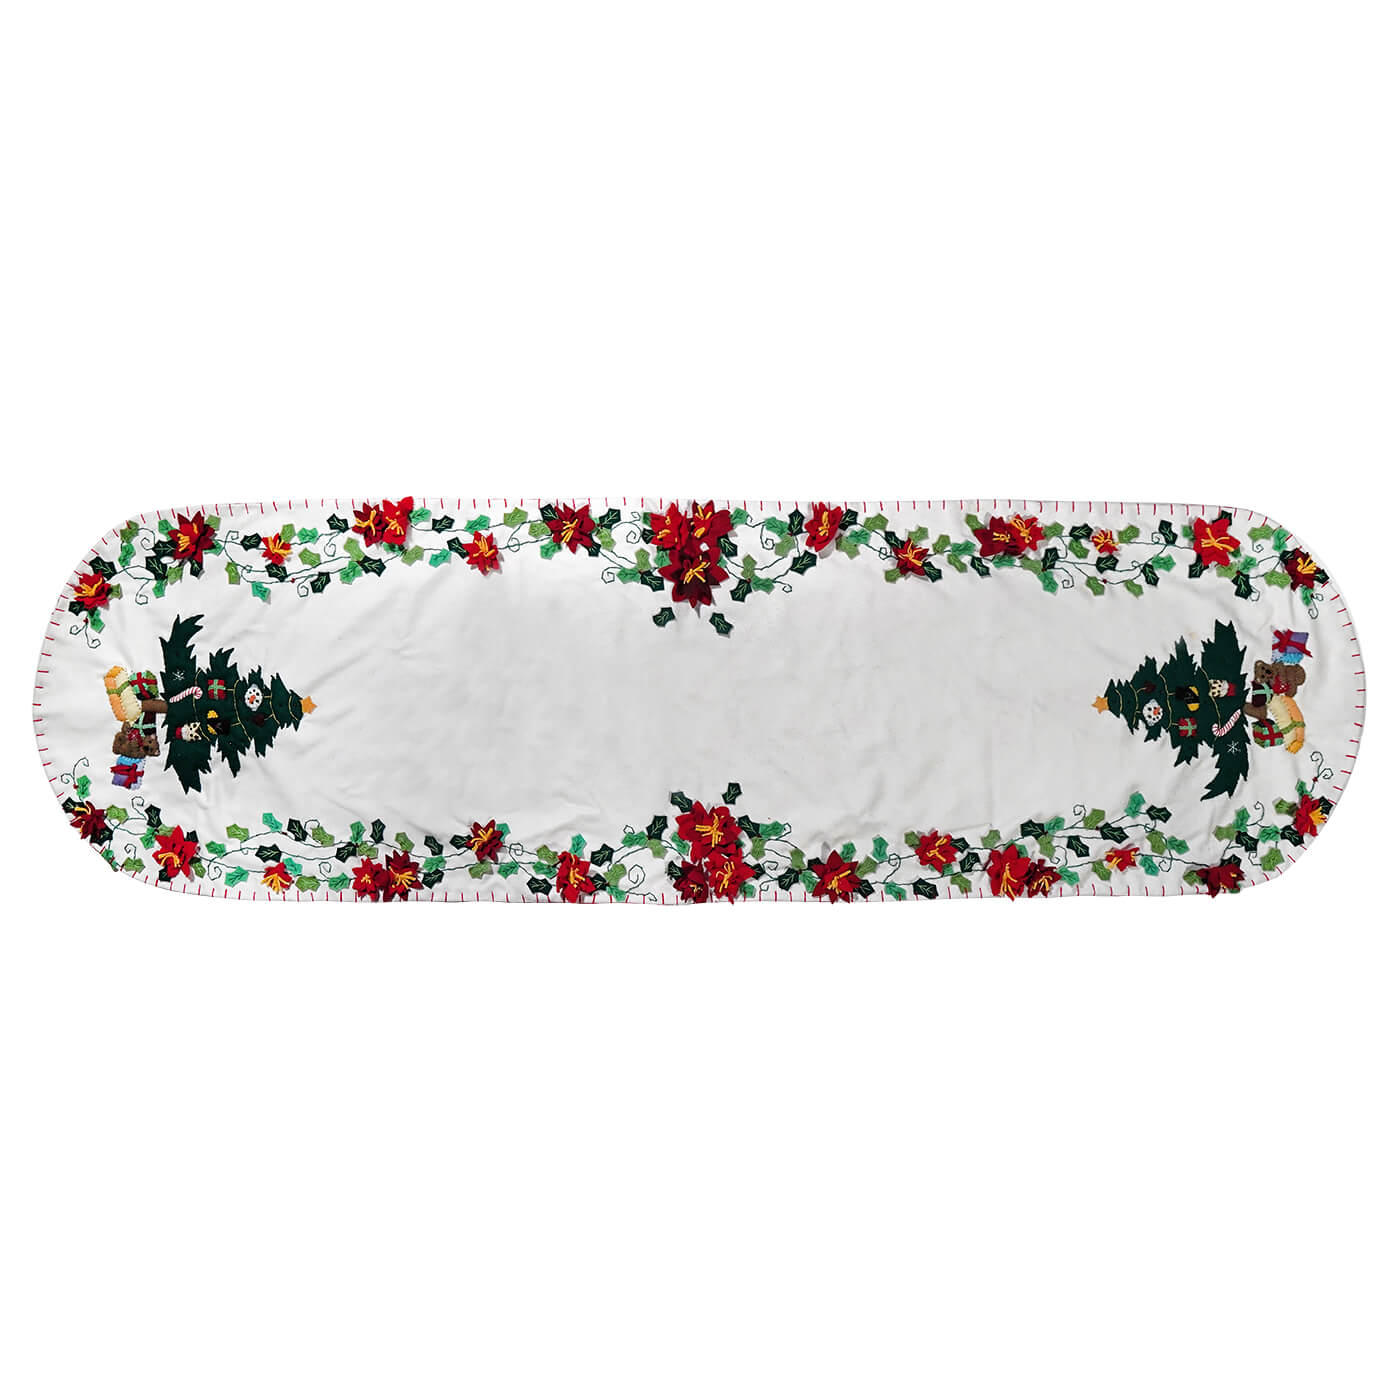 Holly & Vines White Runner With Christmas Tree & Presents